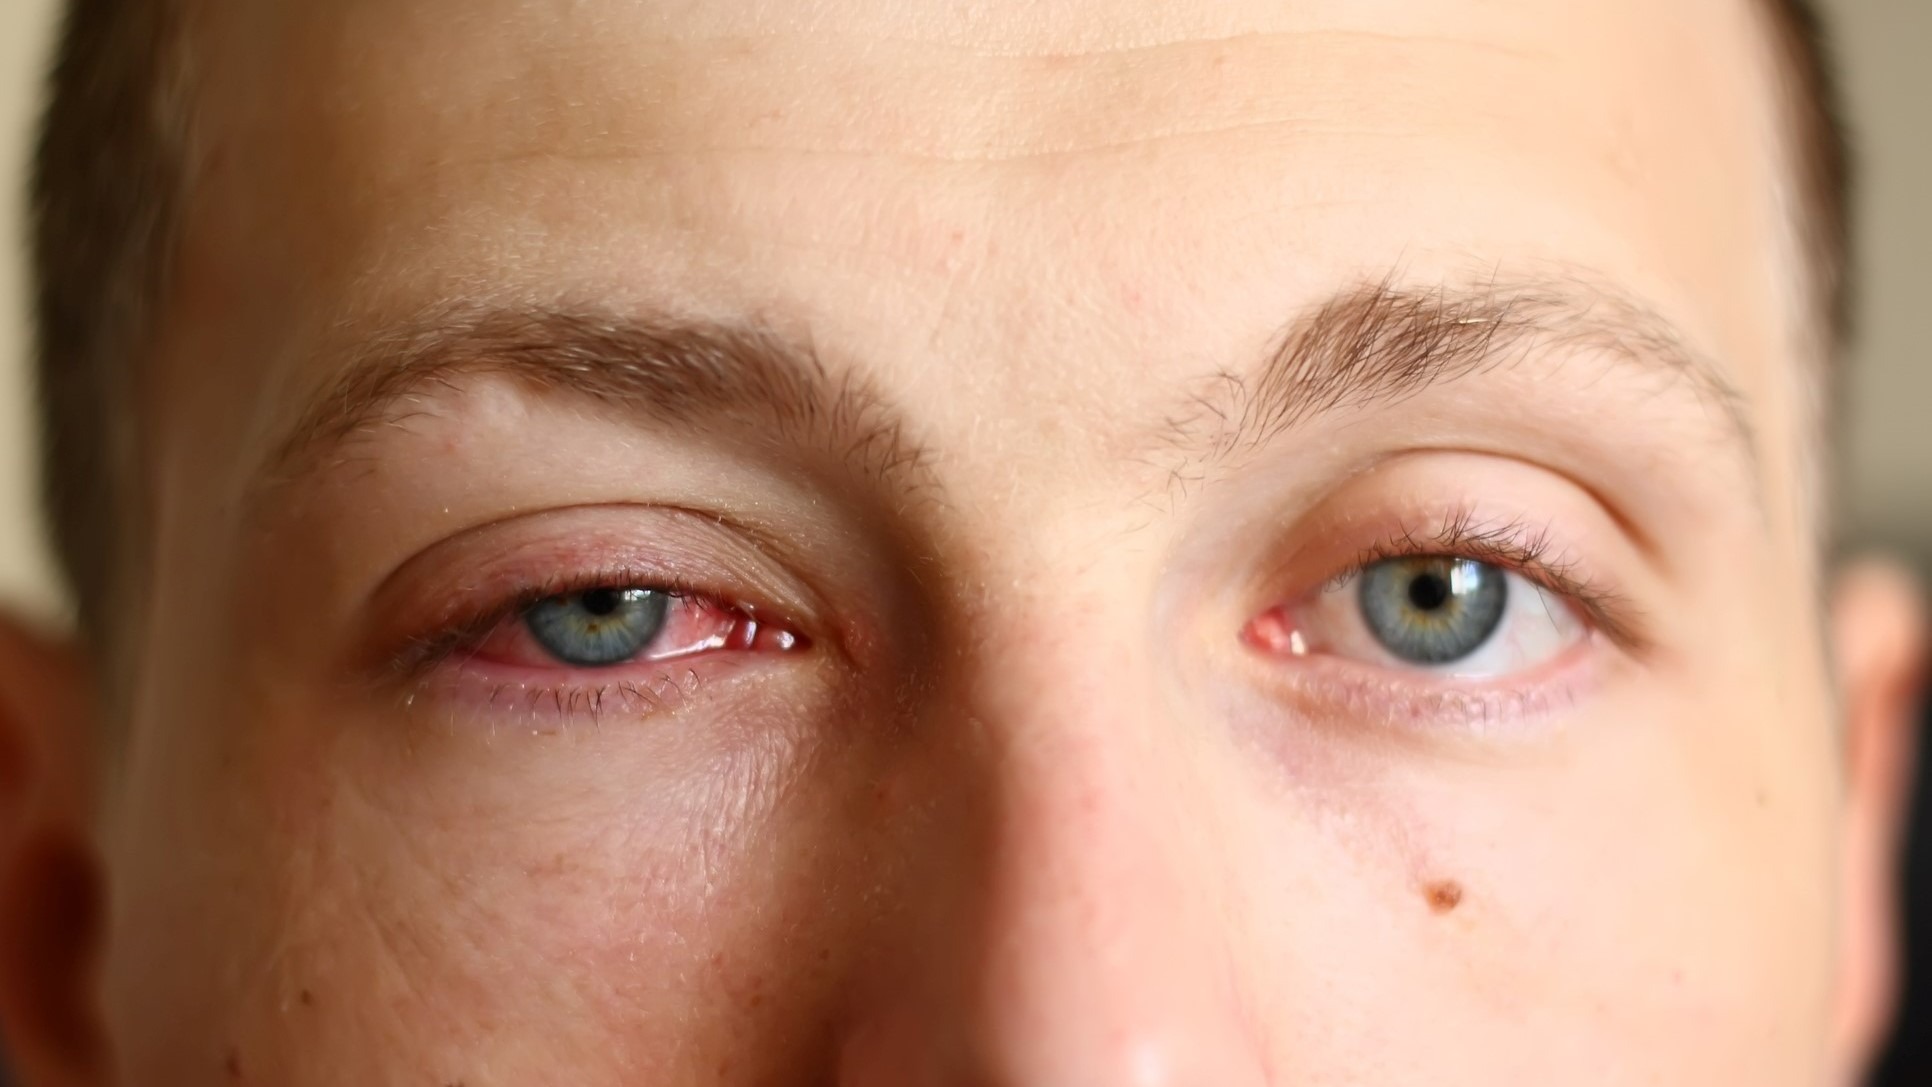 A close-up image of a young male face with a pink eye (conjunctivitis). See more in my portfolio